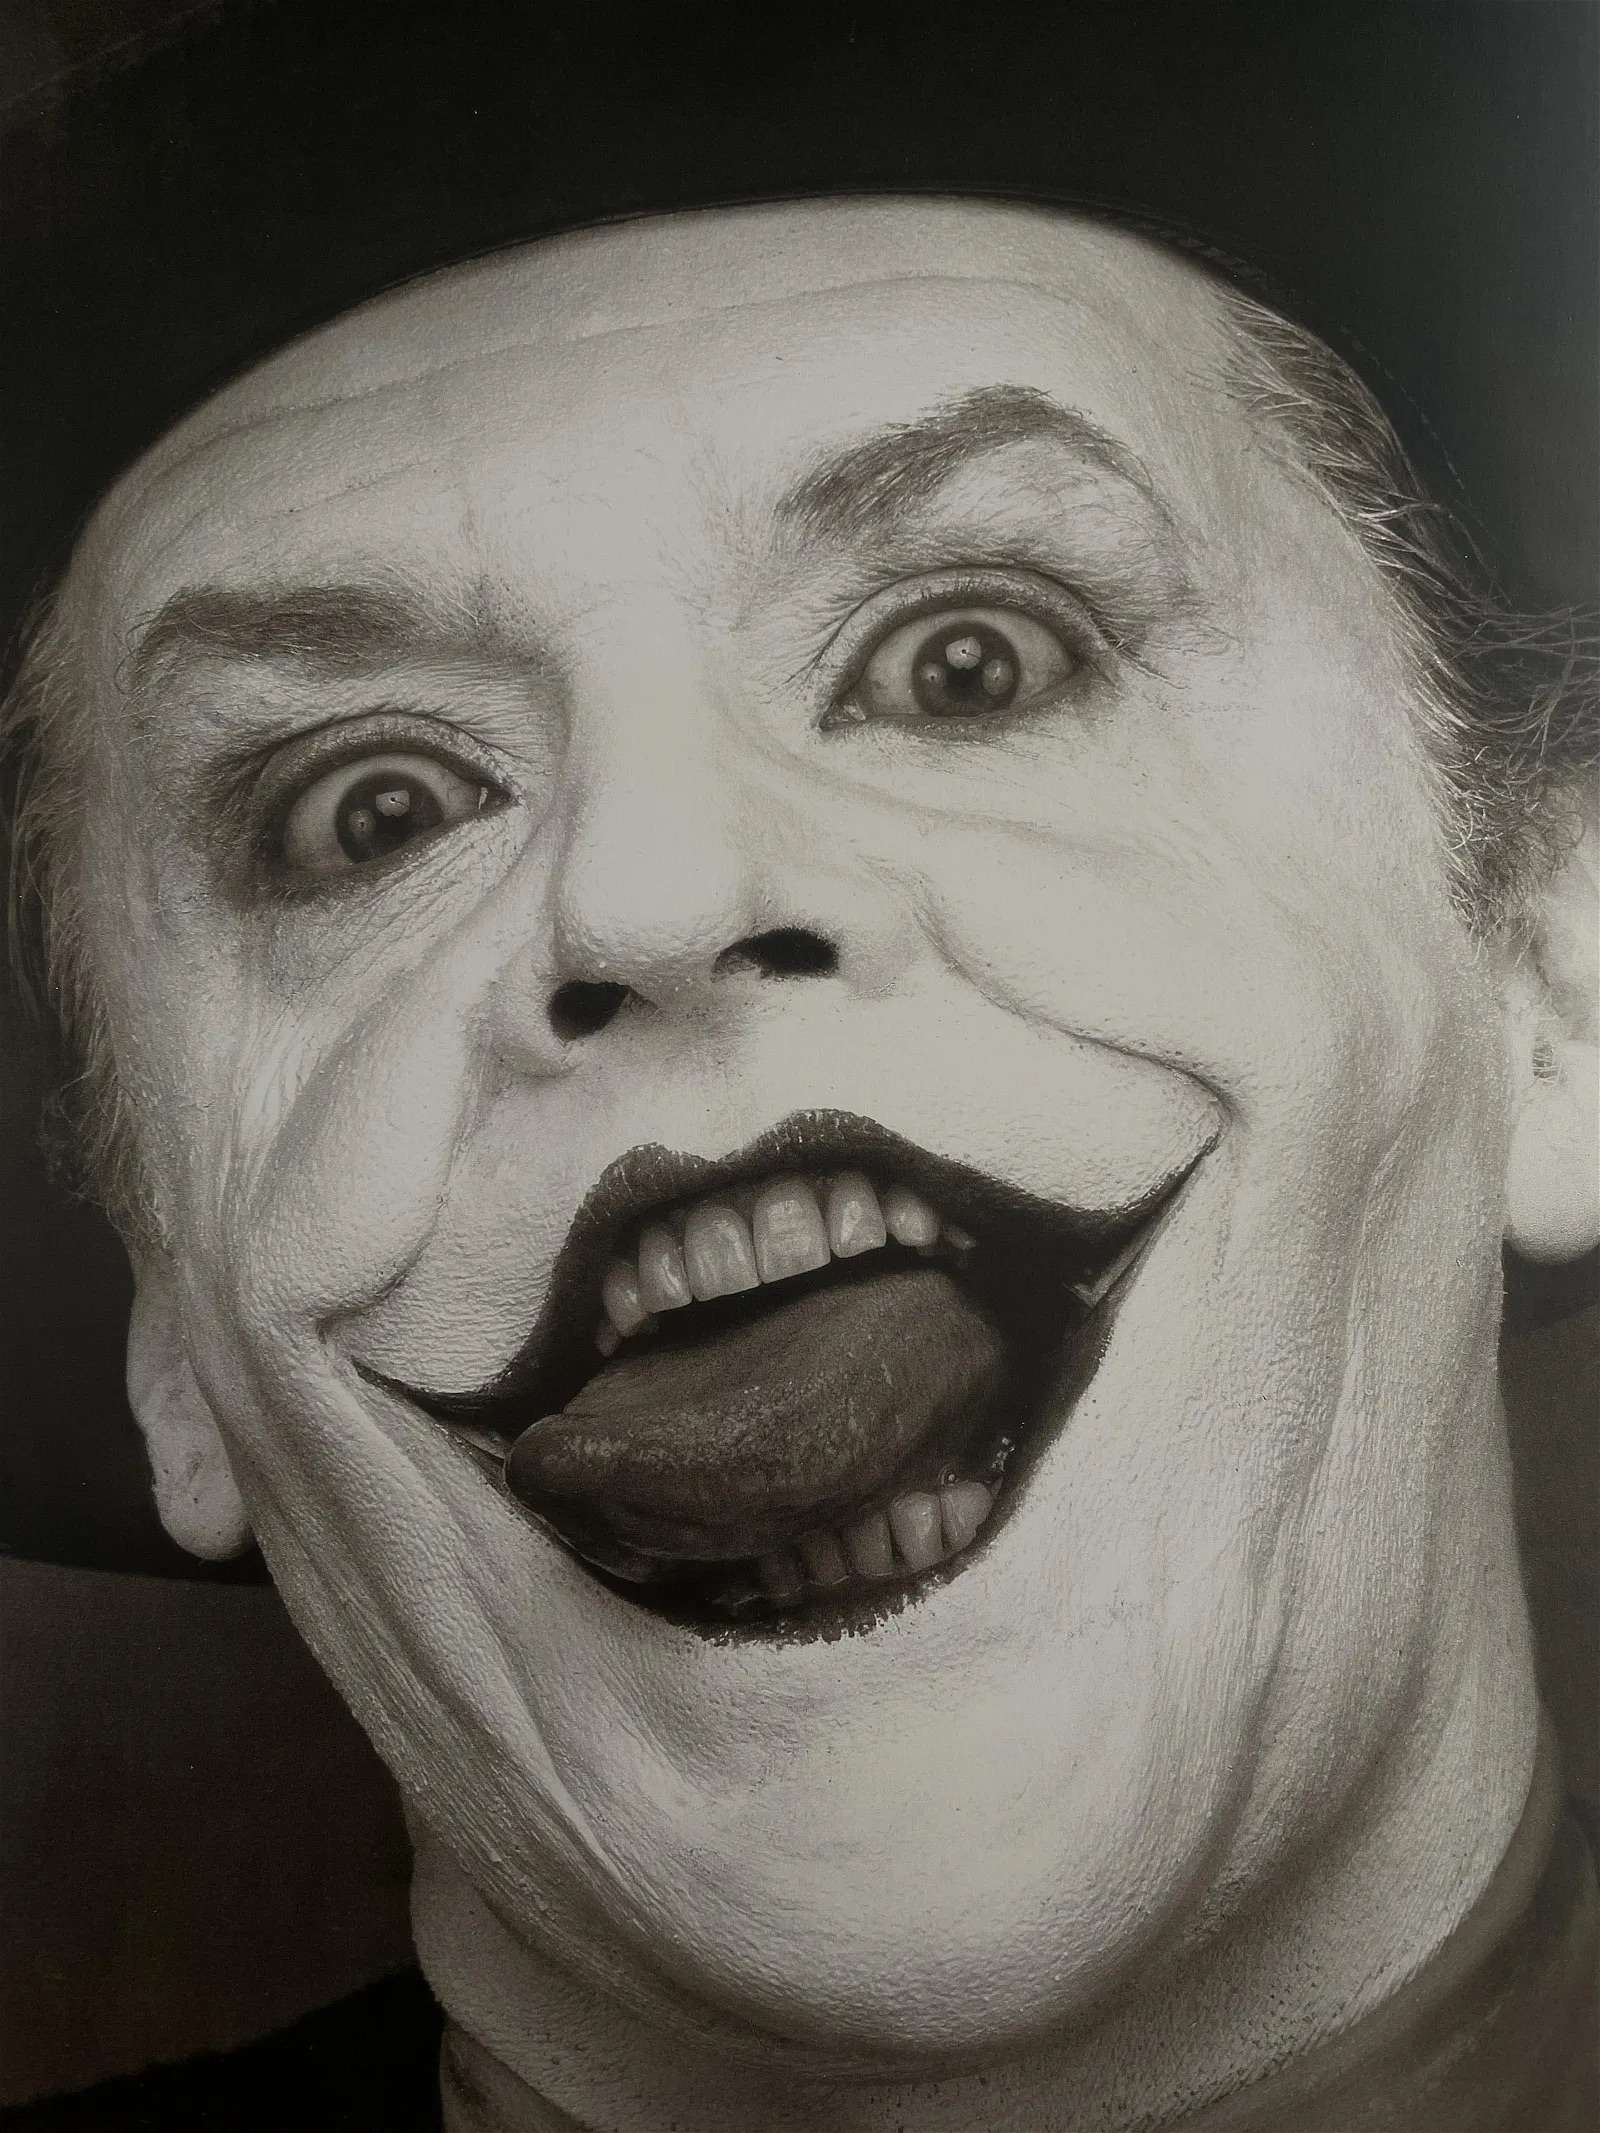 Herb Ritts "Jack Nicholson, London, 1988" Set of Four Prints - Image 4 of 4